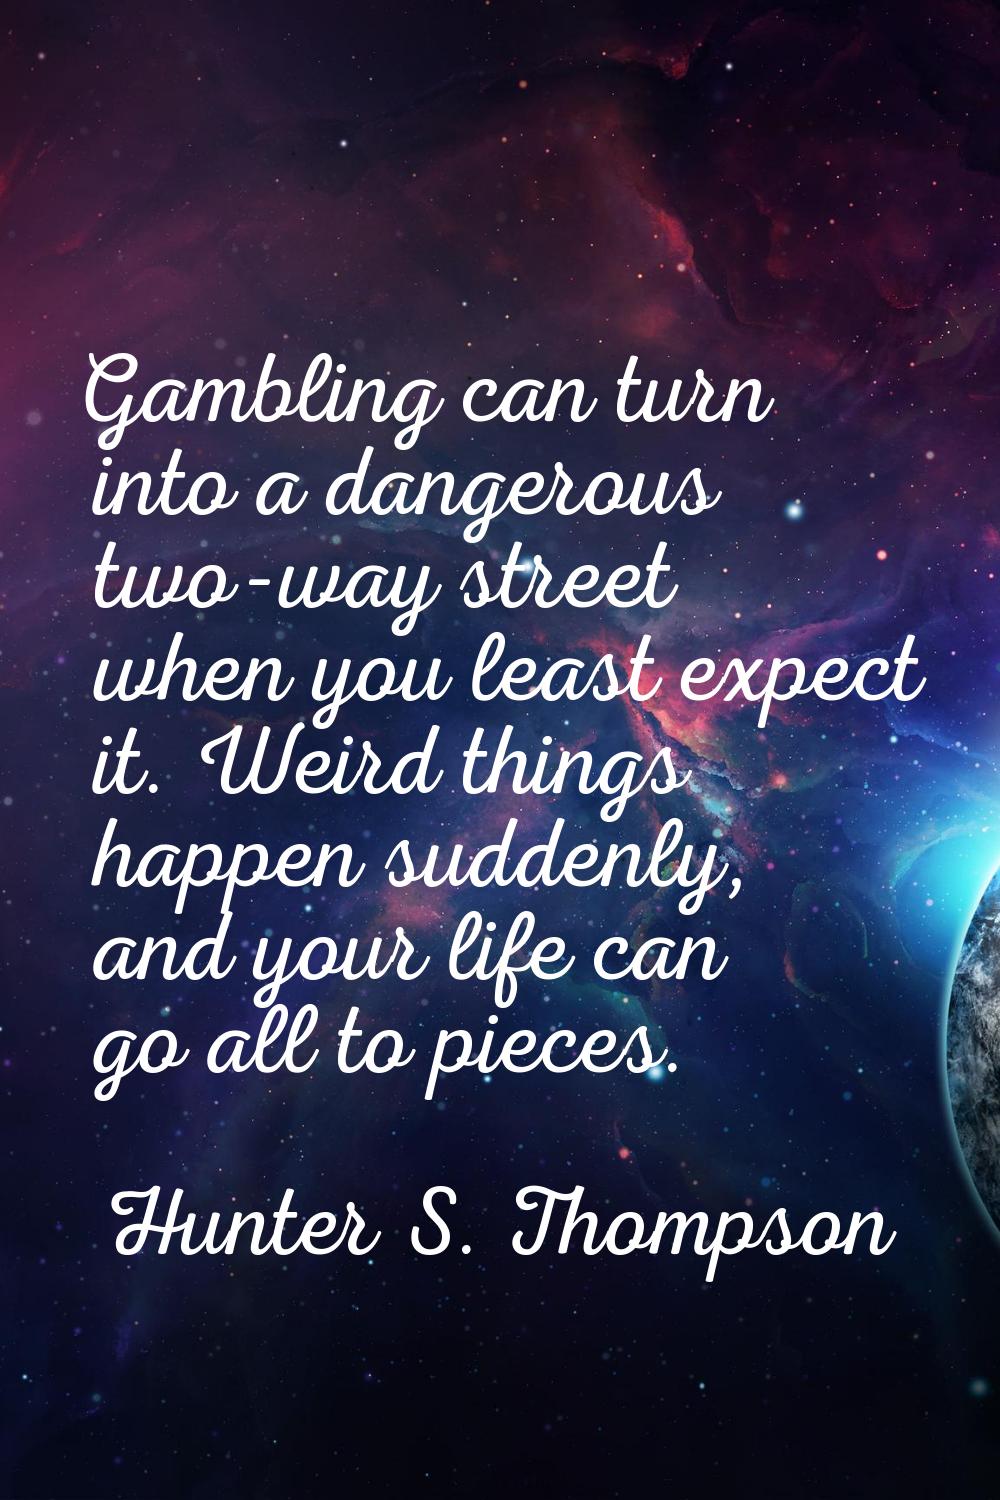 Gambling can turn into a dangerous two-way street when you least expect it. Weird things happen sud